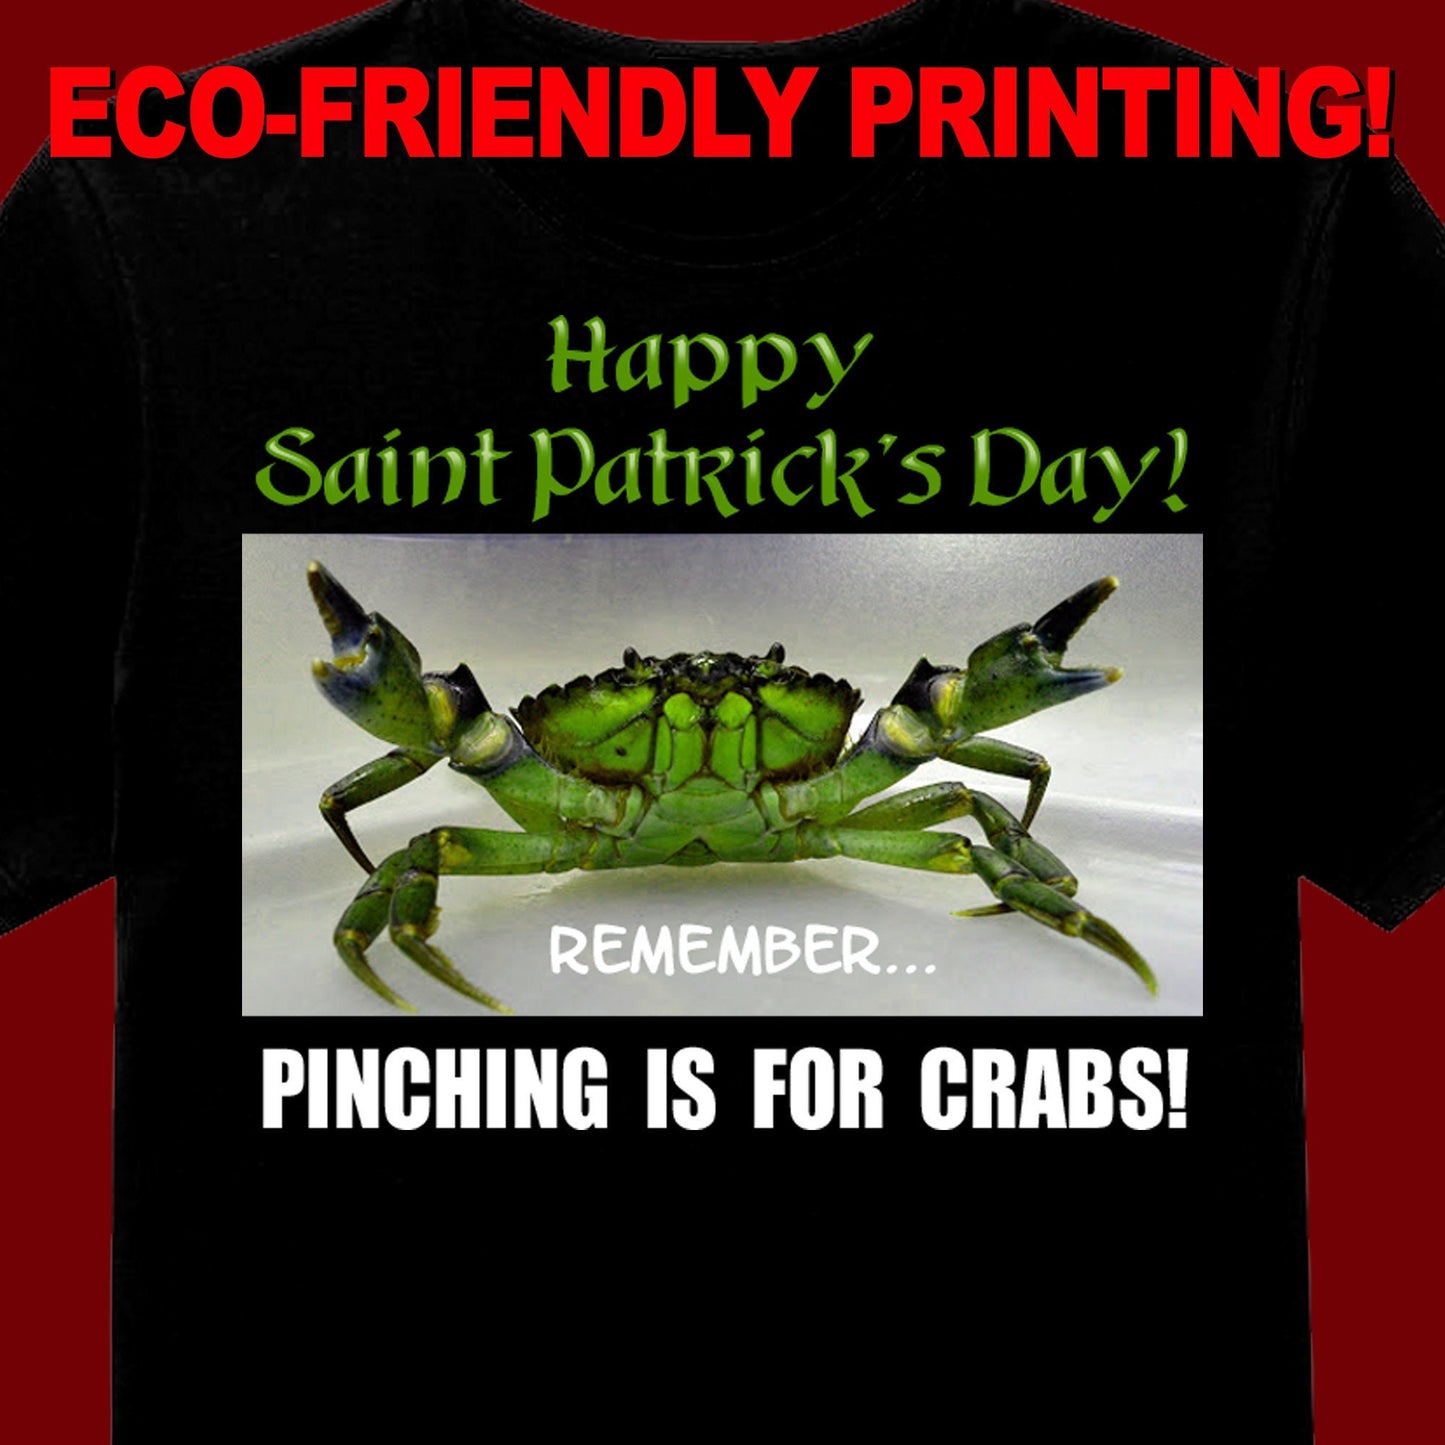 Pinching is for Crabs T Shirt, St Paddy's Day tee, St. Patrick's Day, Irish Gift